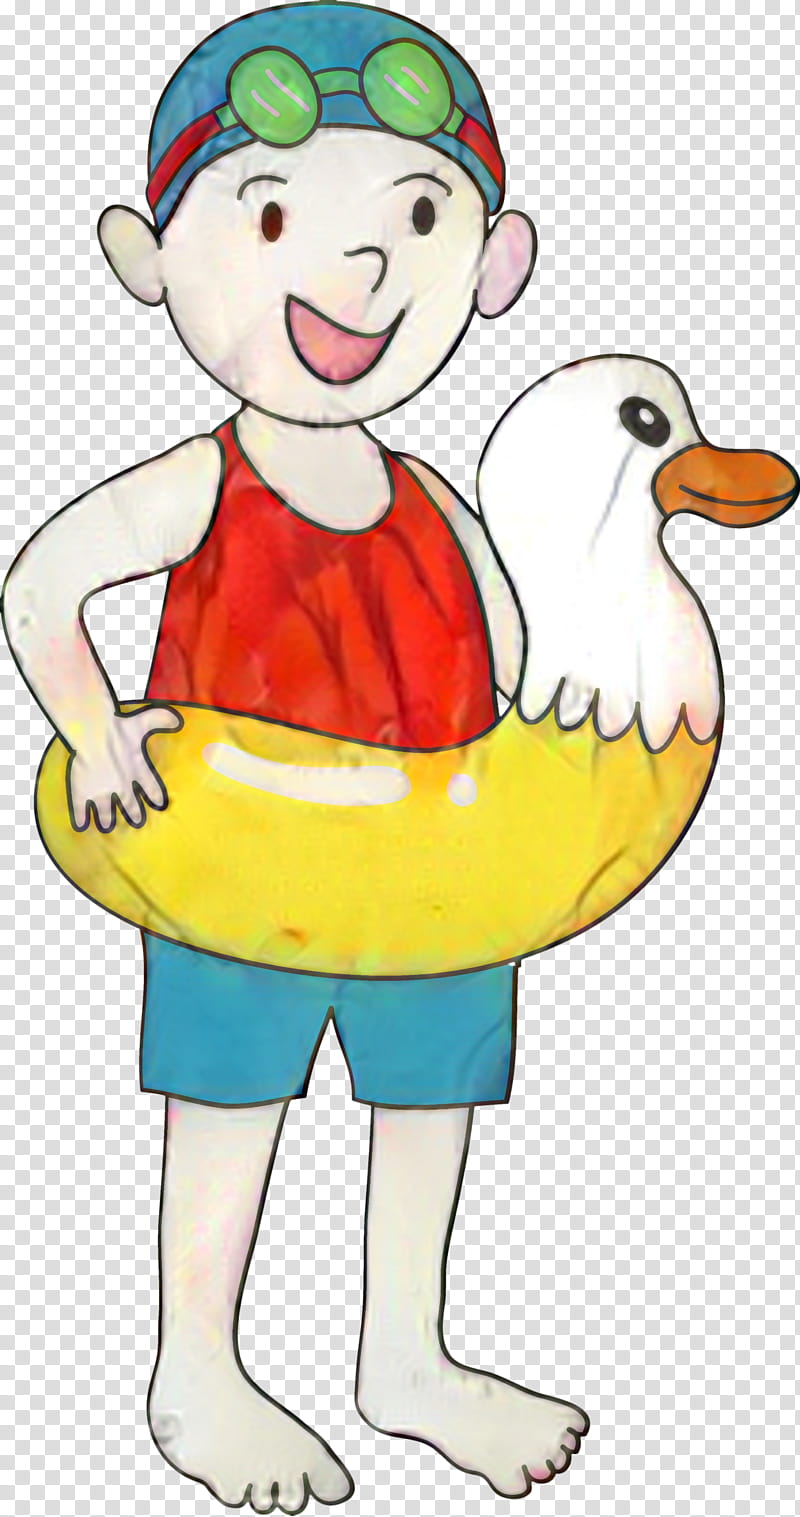 Swimming, Clothing, Cartoon, Fountain, Statue, Swimming Pools, Duck, Bird transparent background PNG clipart